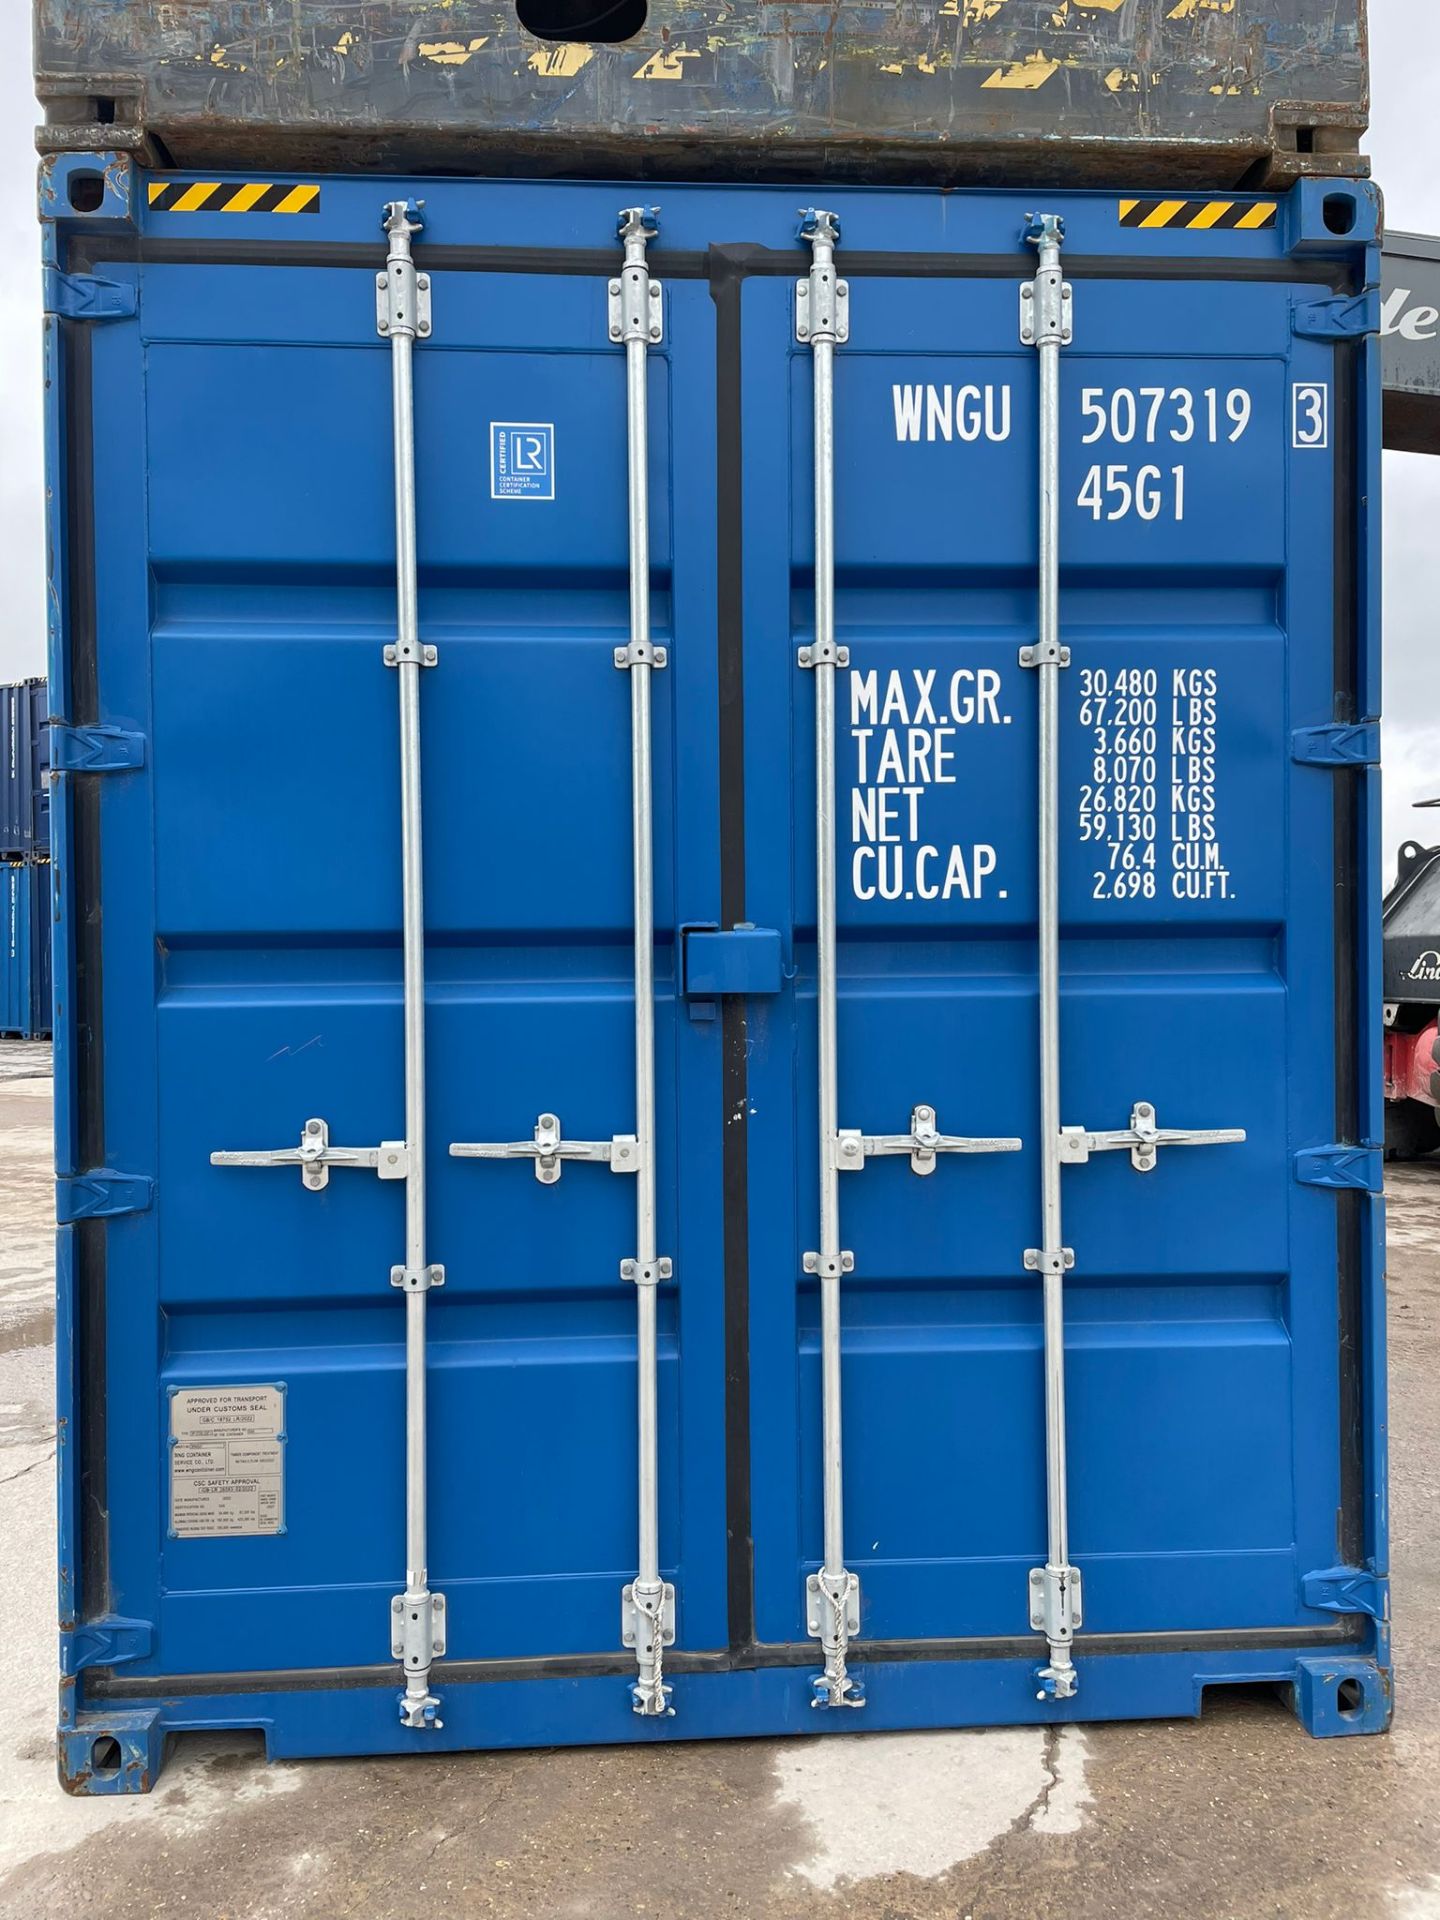 40ft HC Shipping Container - ref WNGU5073193 - NO RESERVE